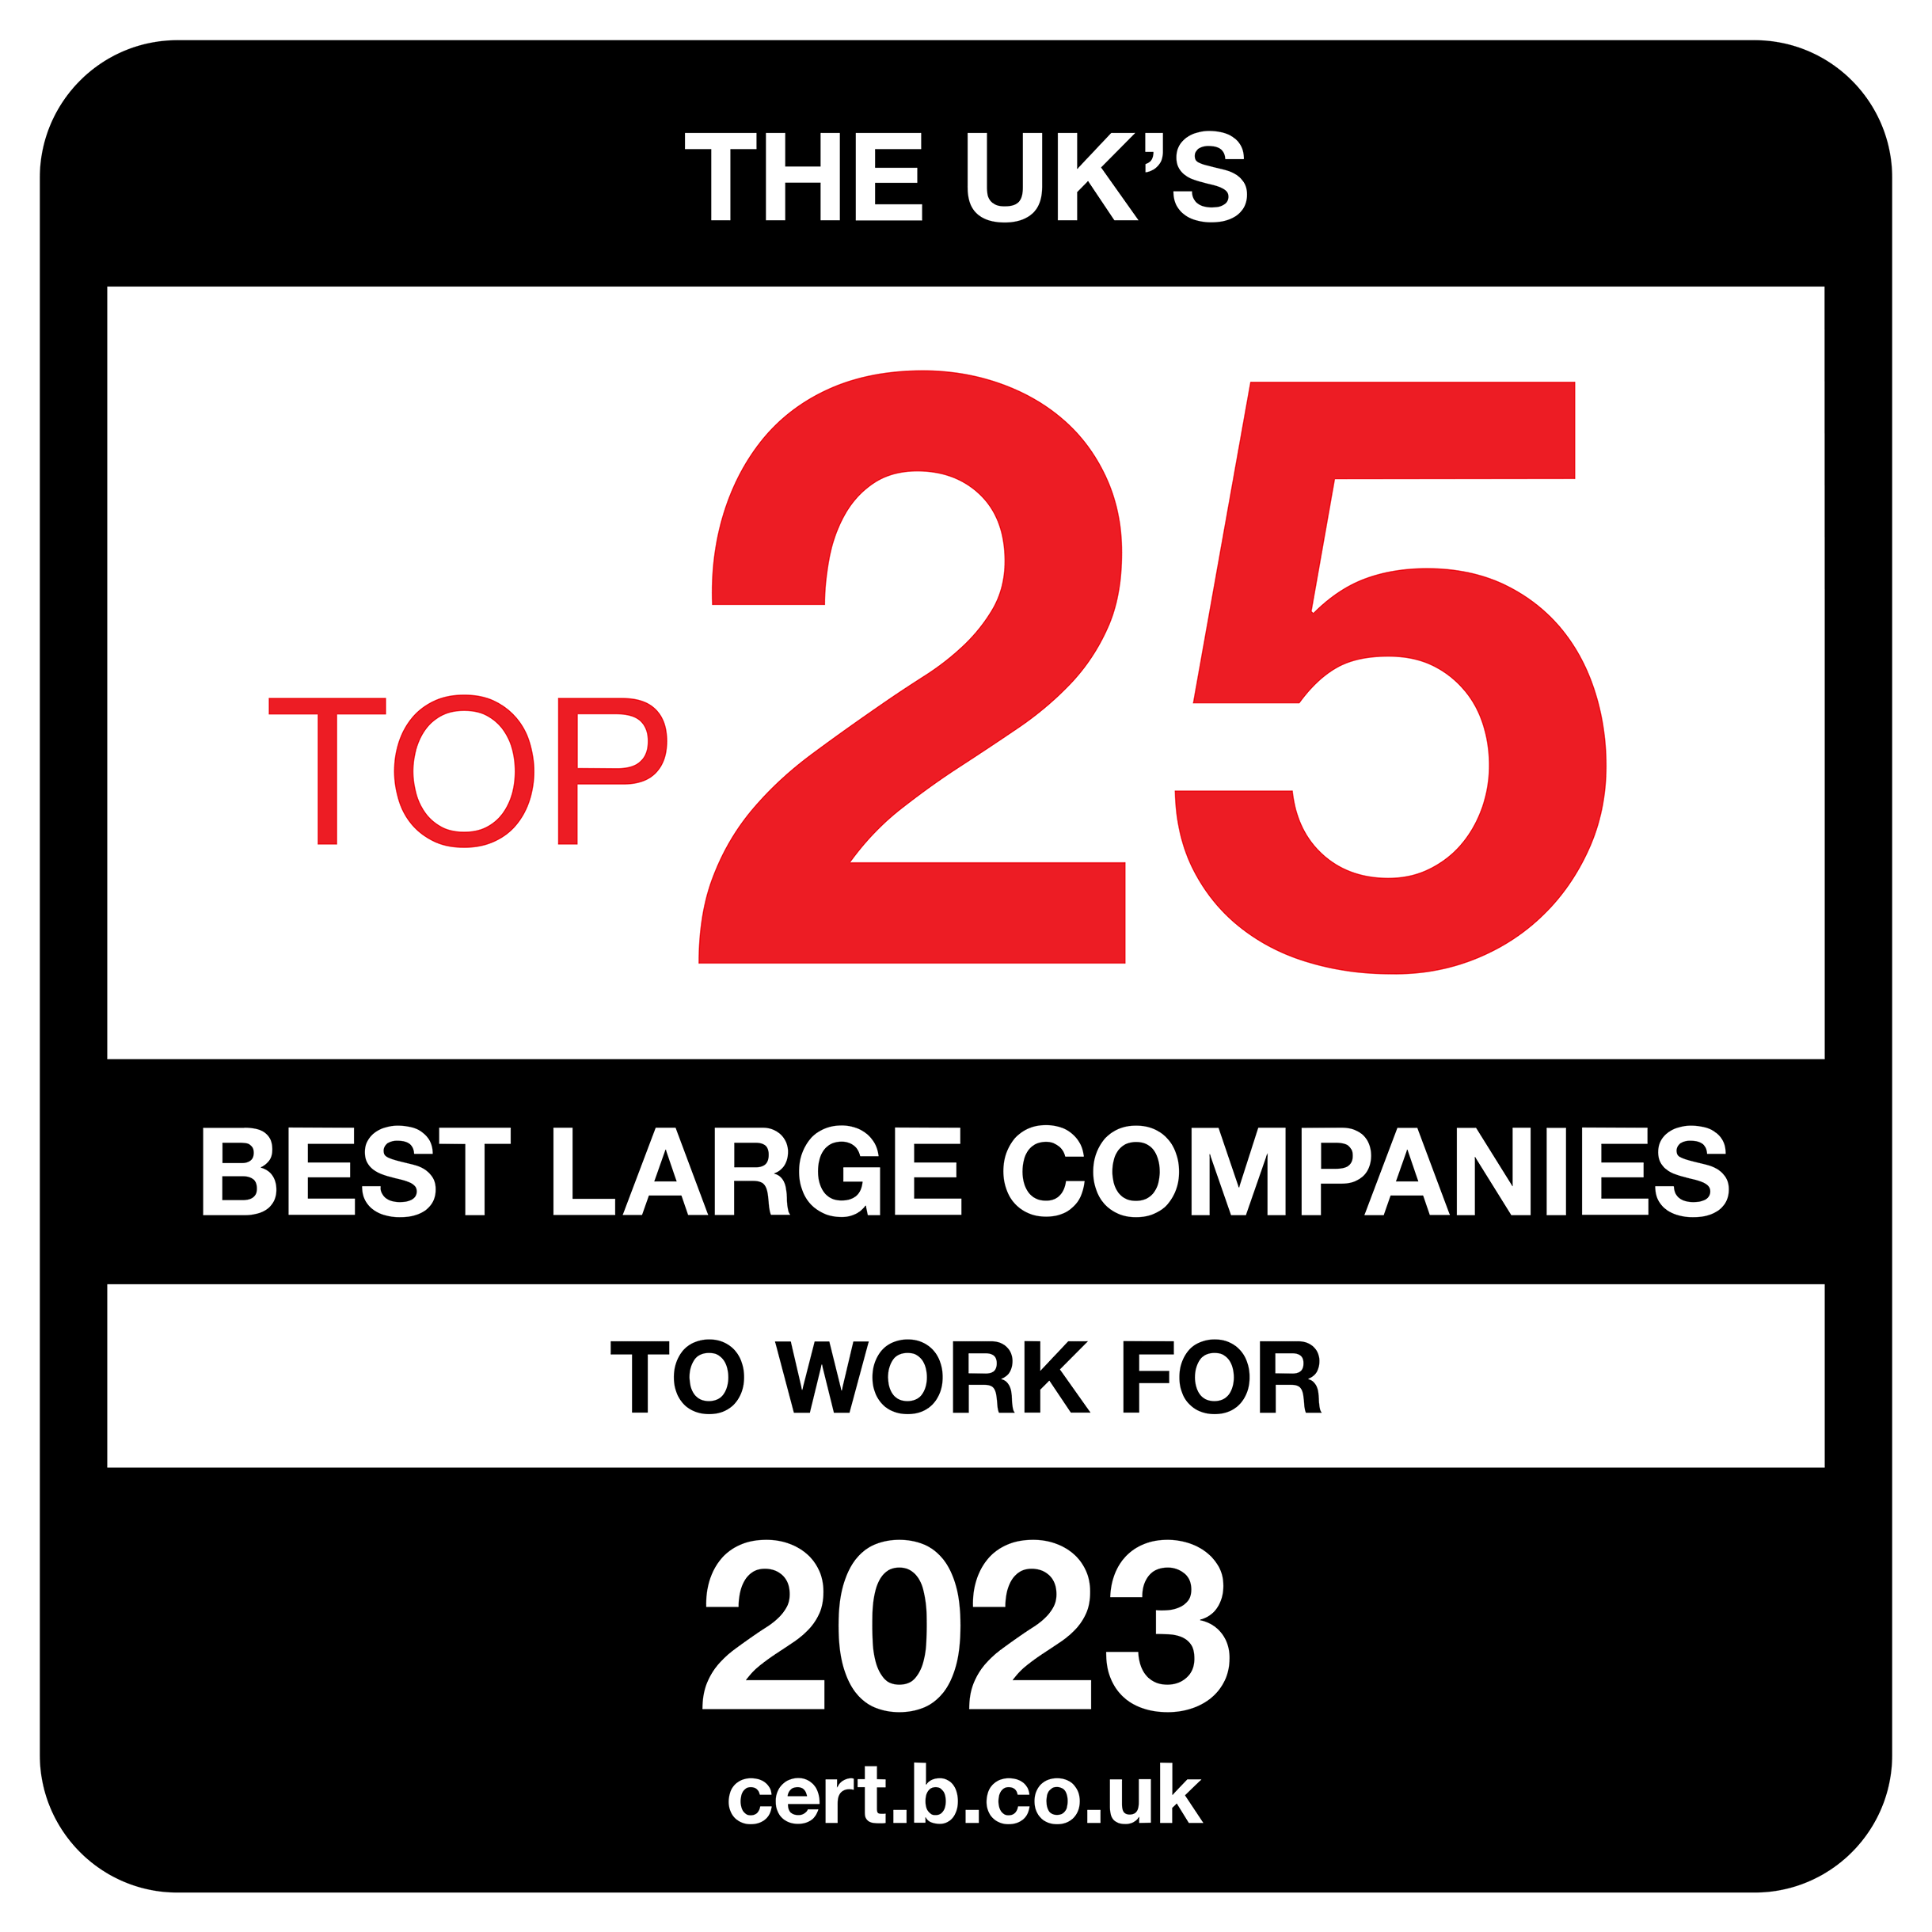 AJ Bell is the top 25 best large companies to work for in 2022